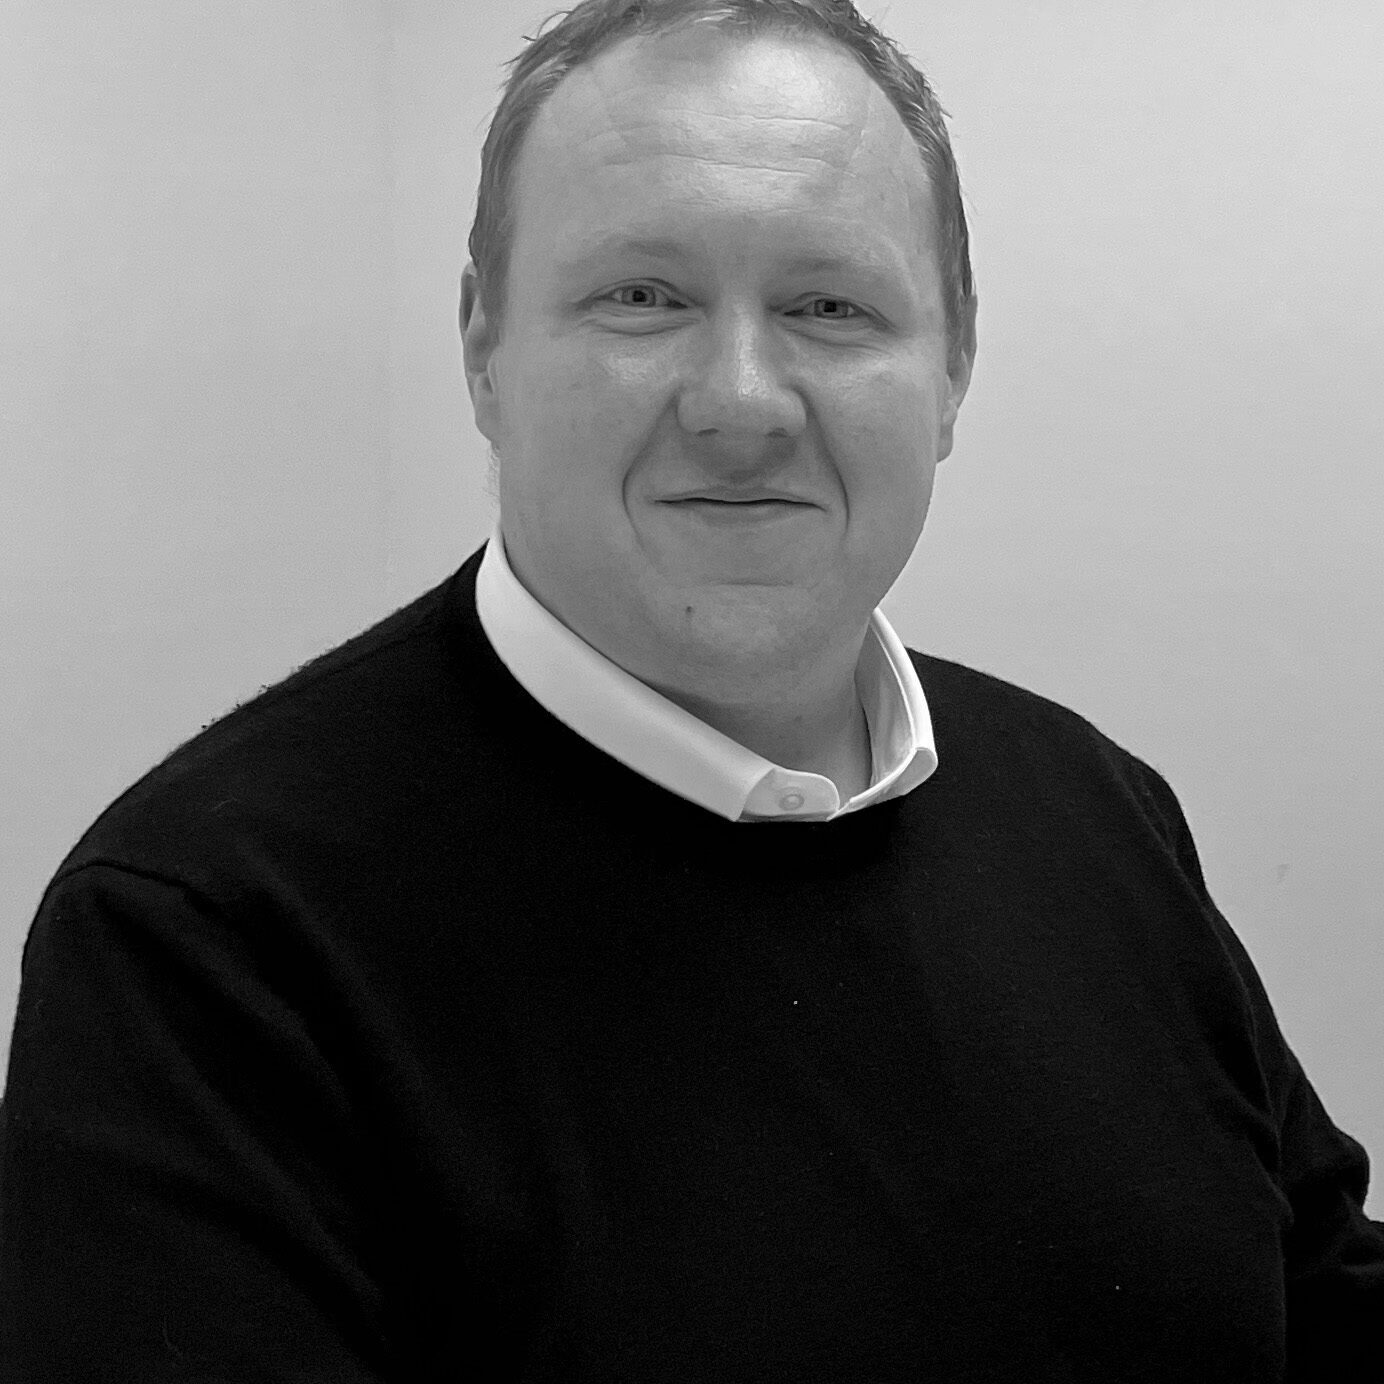 CV Photograph - Kevin McGuigan - B and W cropped (1)